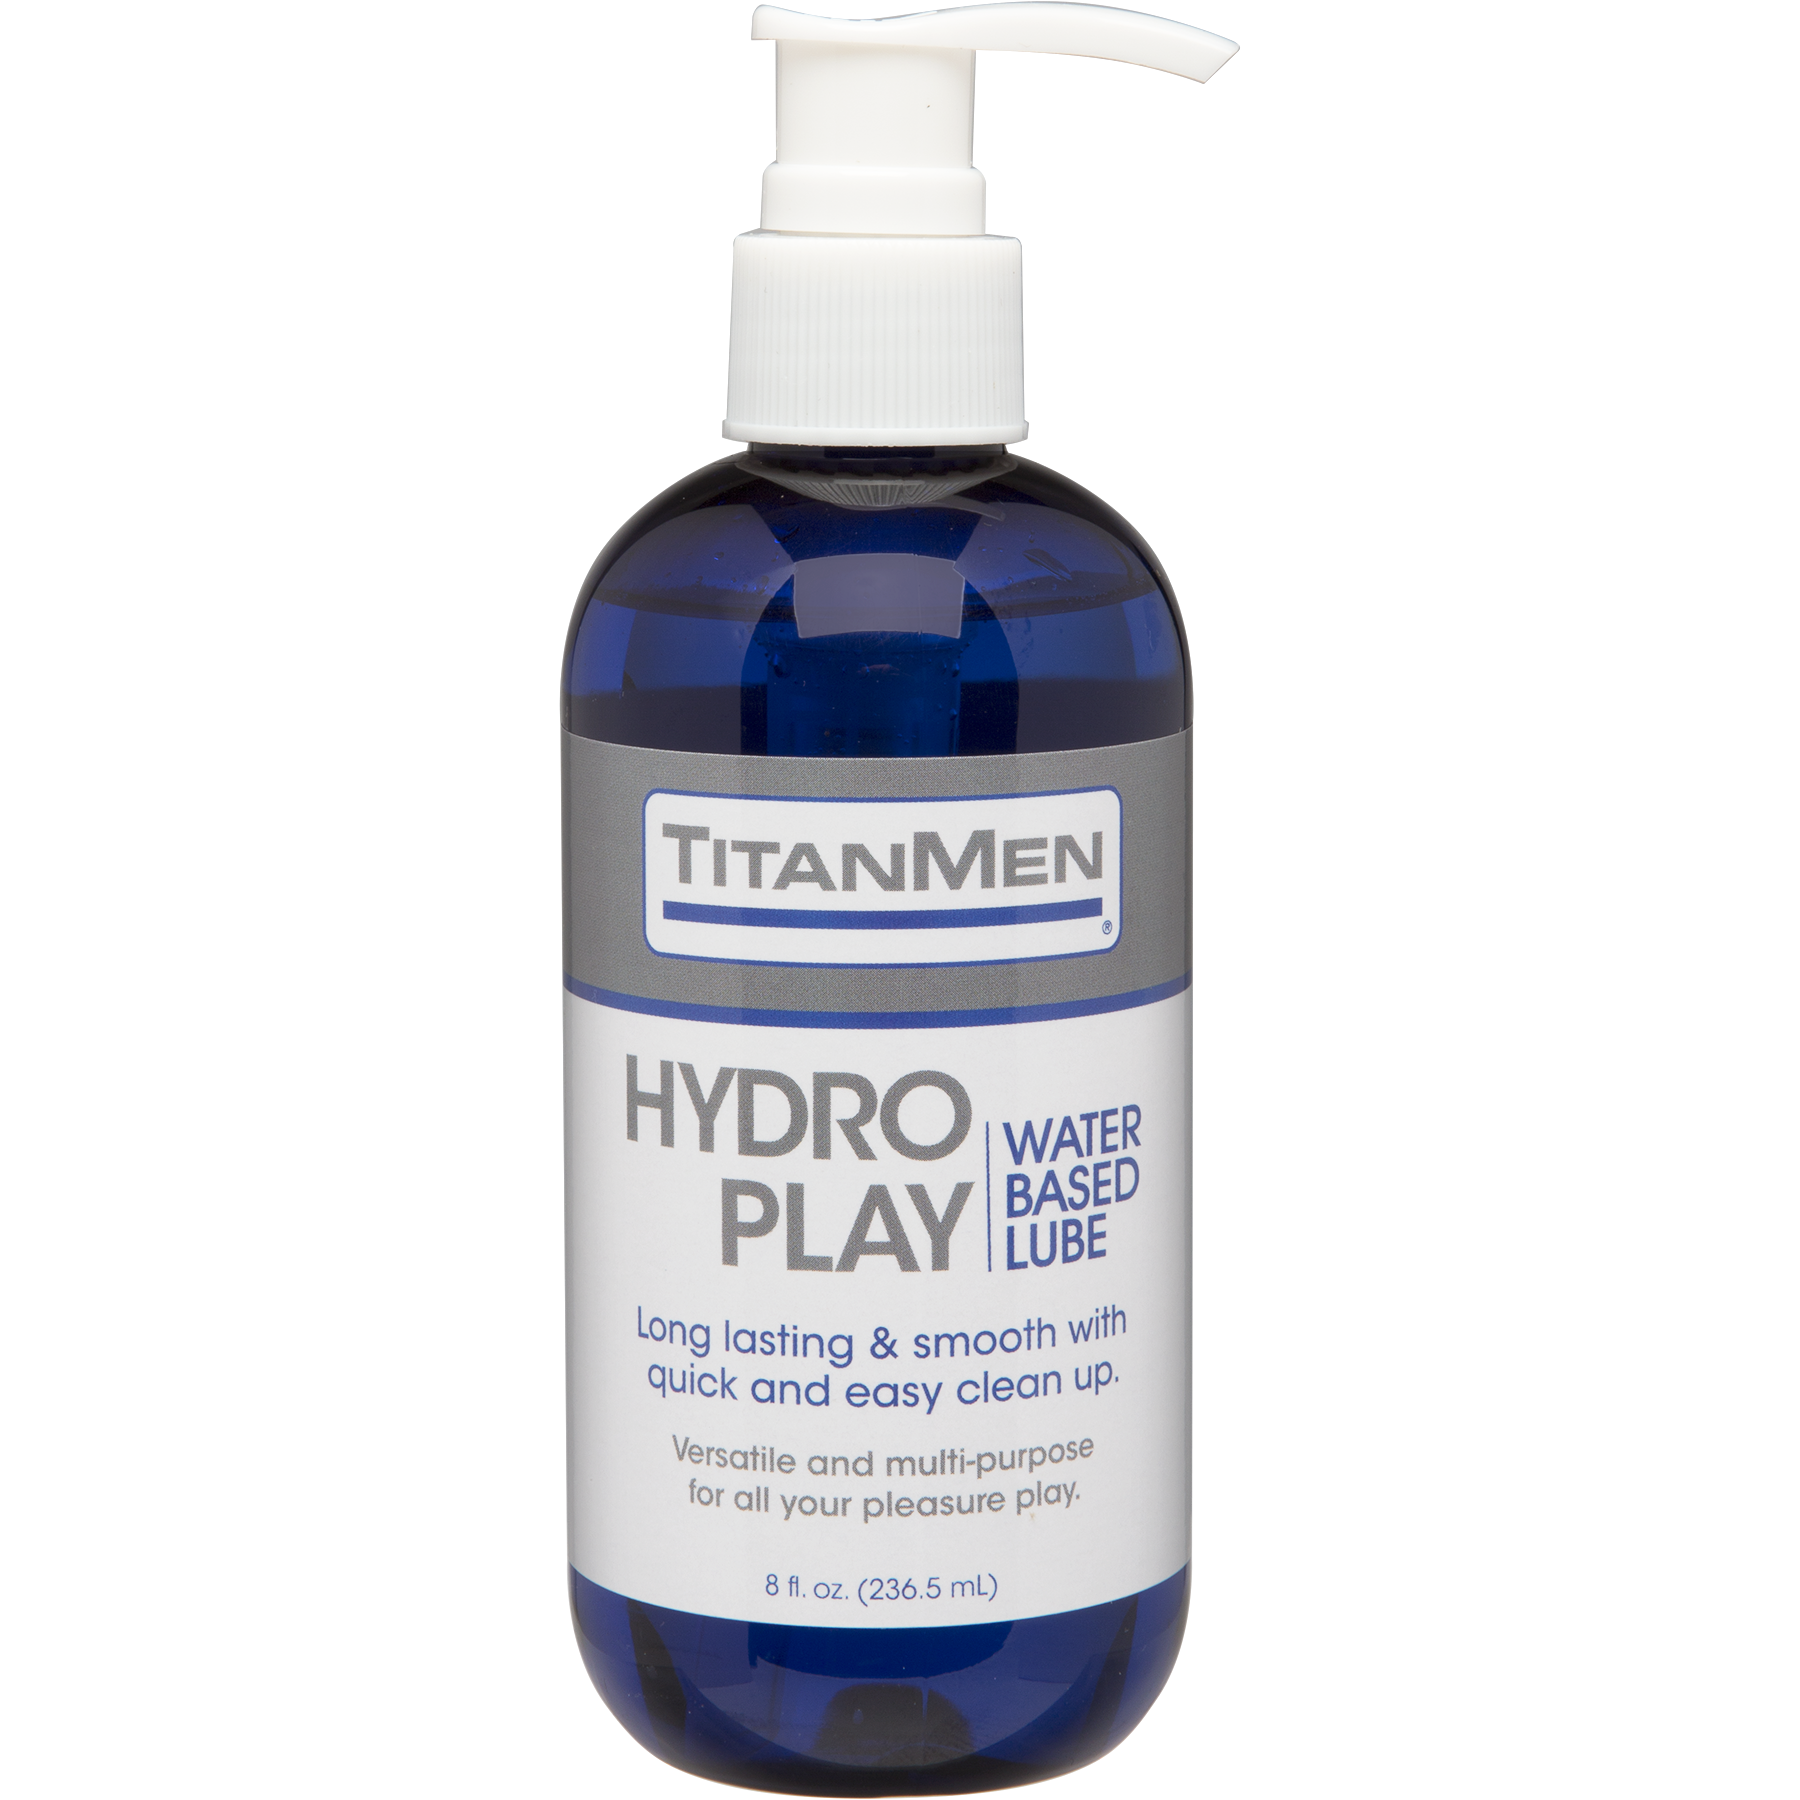 TitanMen+Hydro+Play+Water+Based+Lubricant+Glide+8+Ounce+Pump